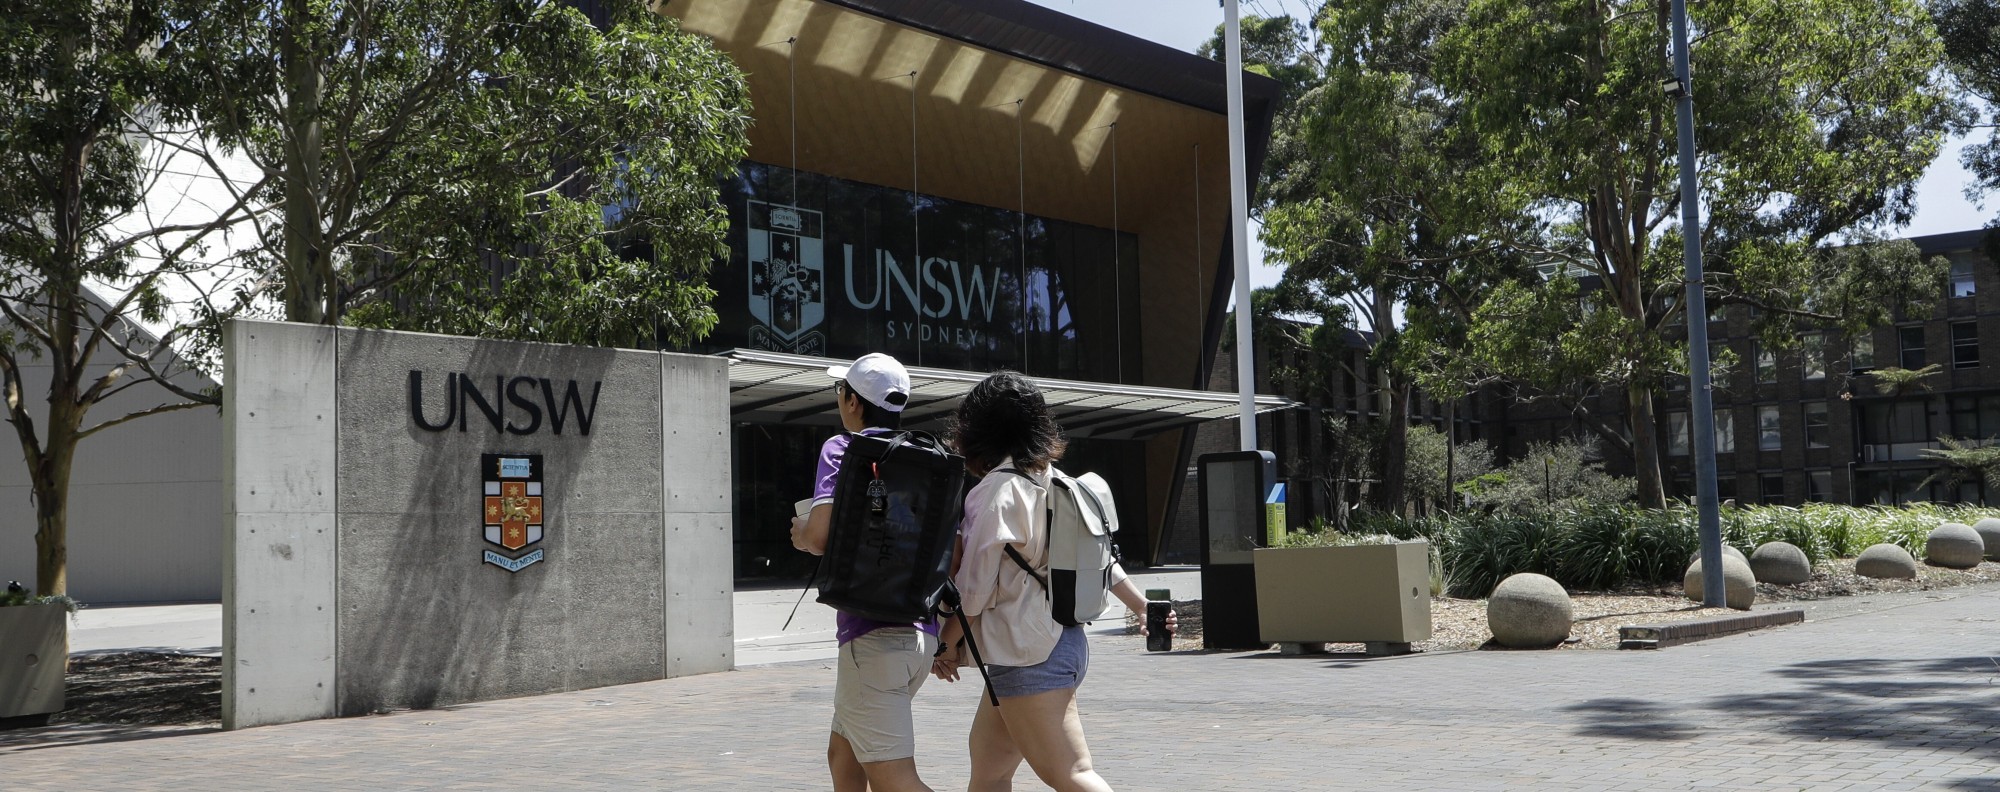 Imponerende Mona Lisa skarpt Chinese students in Australian universities face surveillance, intimidation  by Beijing for views: rights group | South China Morning Post